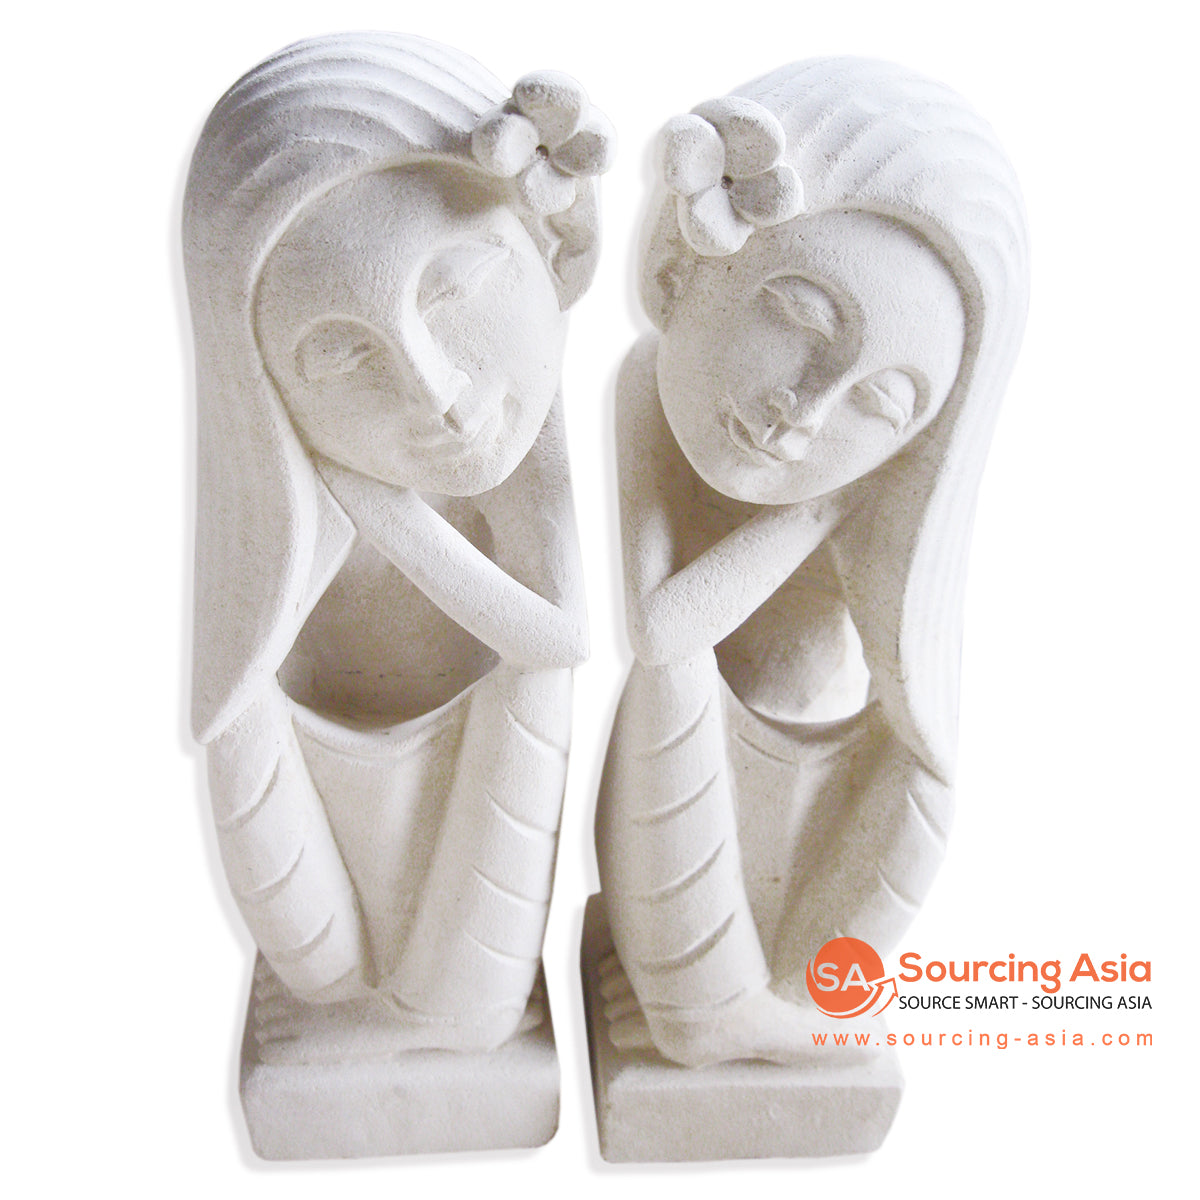 MHB136-20 SET OF TWO STONE DREAMING LADY LONG HAIR STATUES